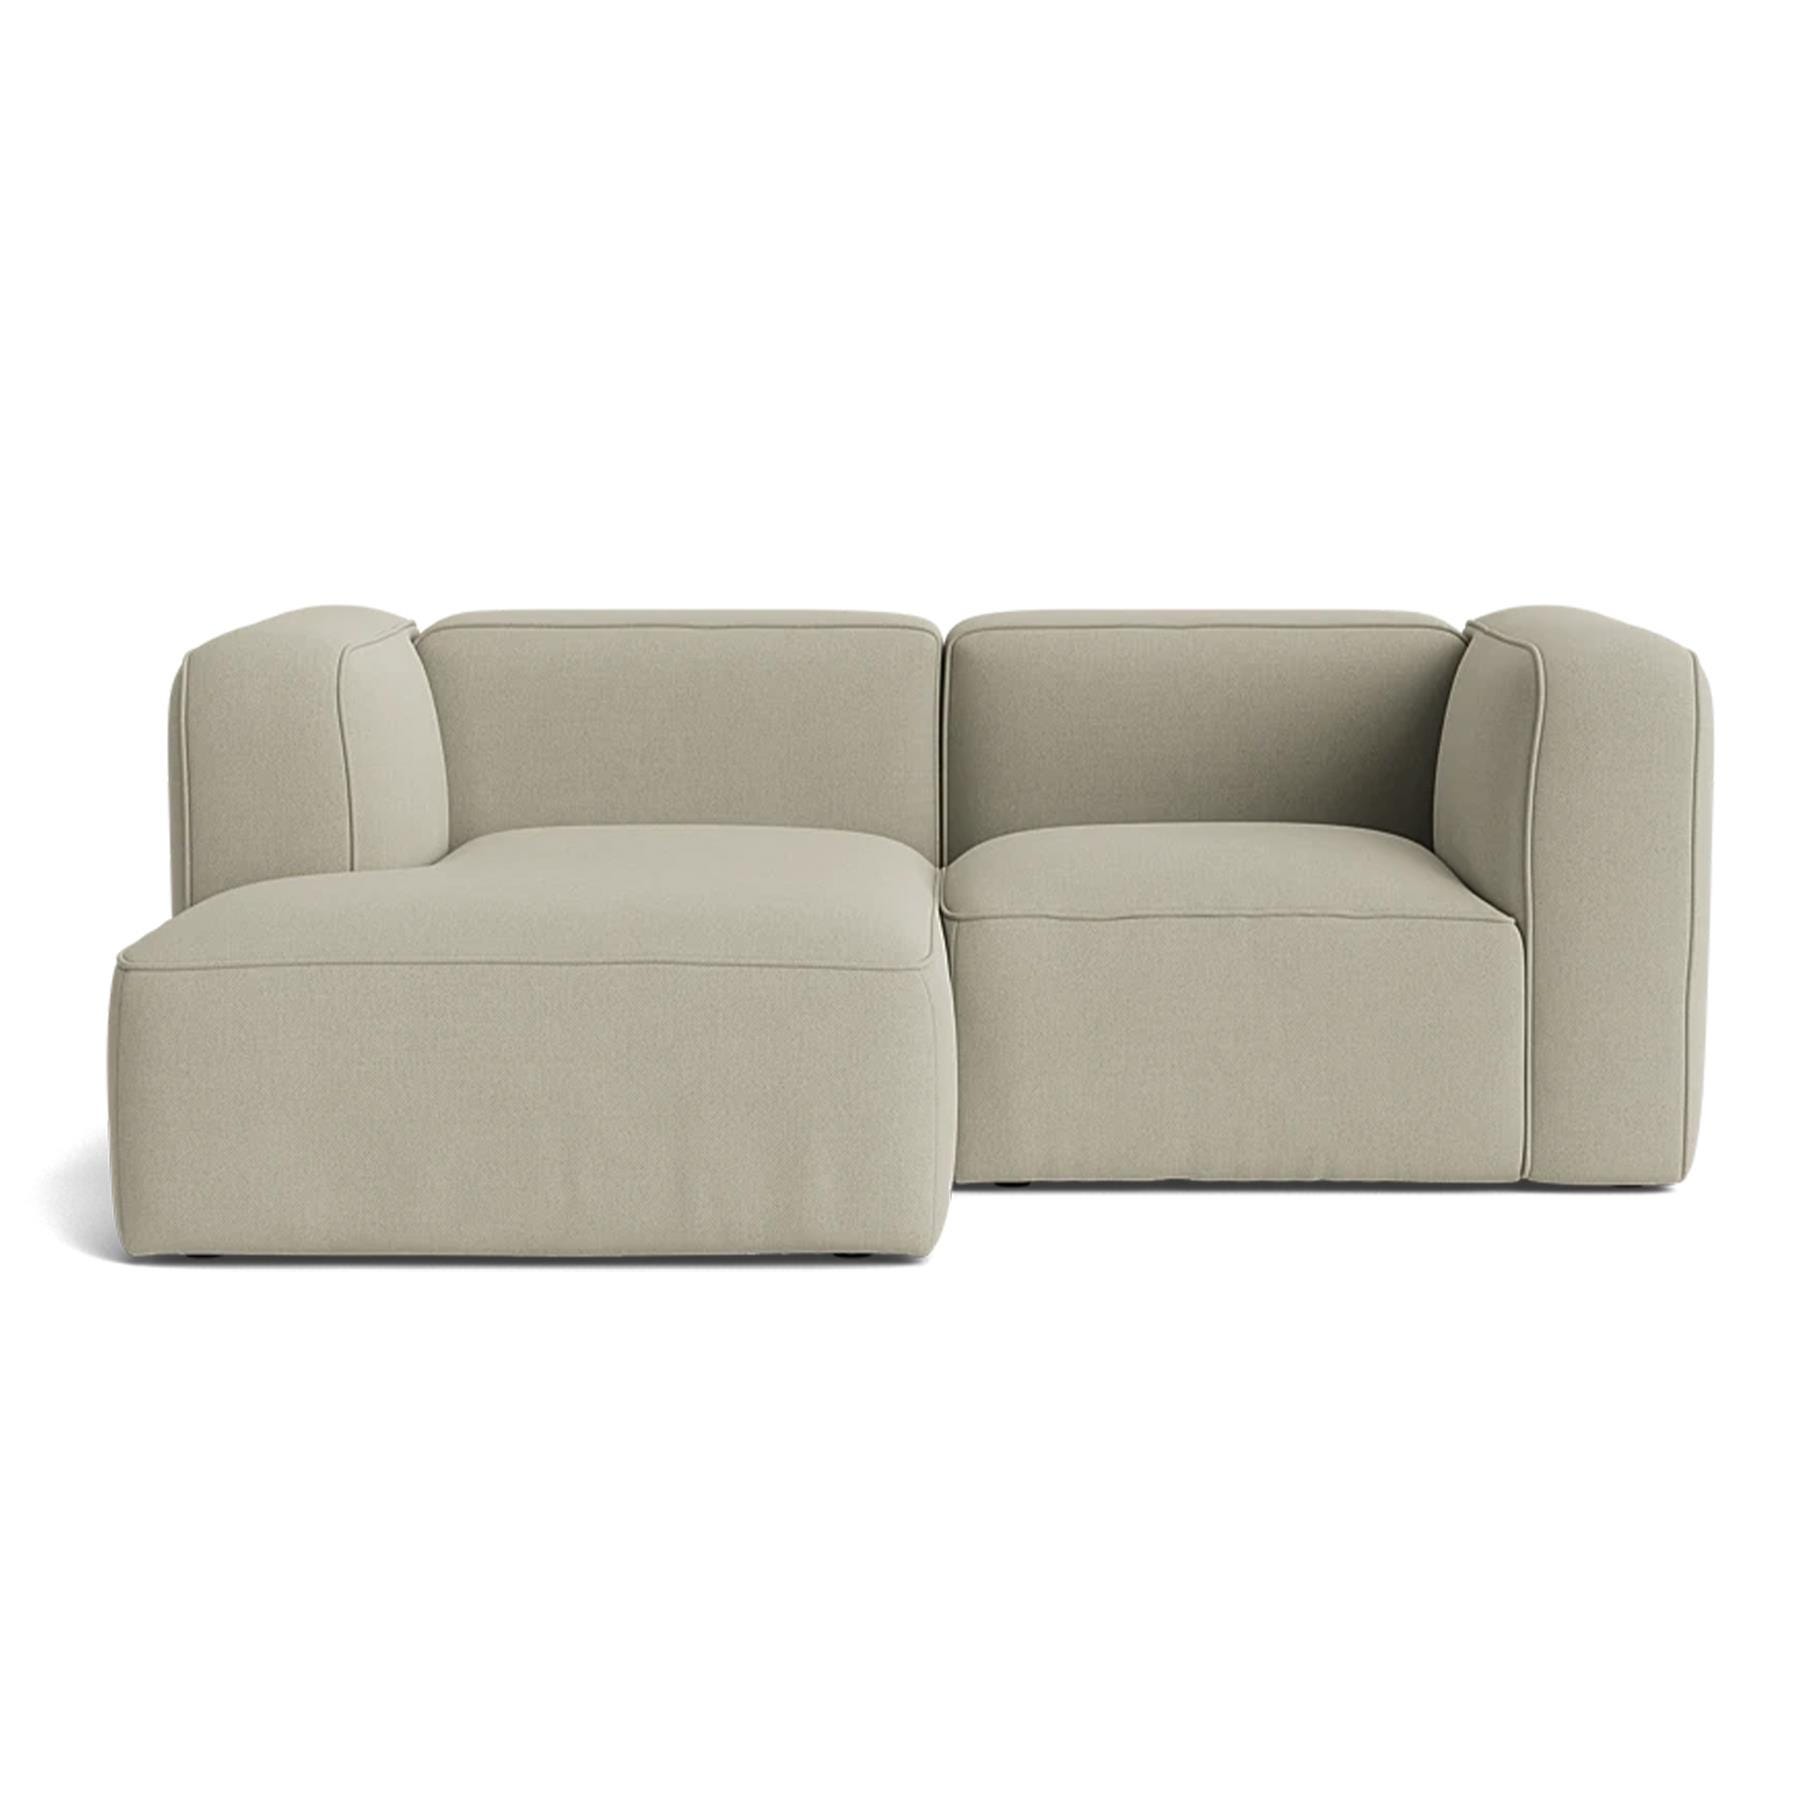 Make Nordic Basecamp Small Sofa Fiord 322 Left Brown Designer Furniture From Holloways Of Ludlow